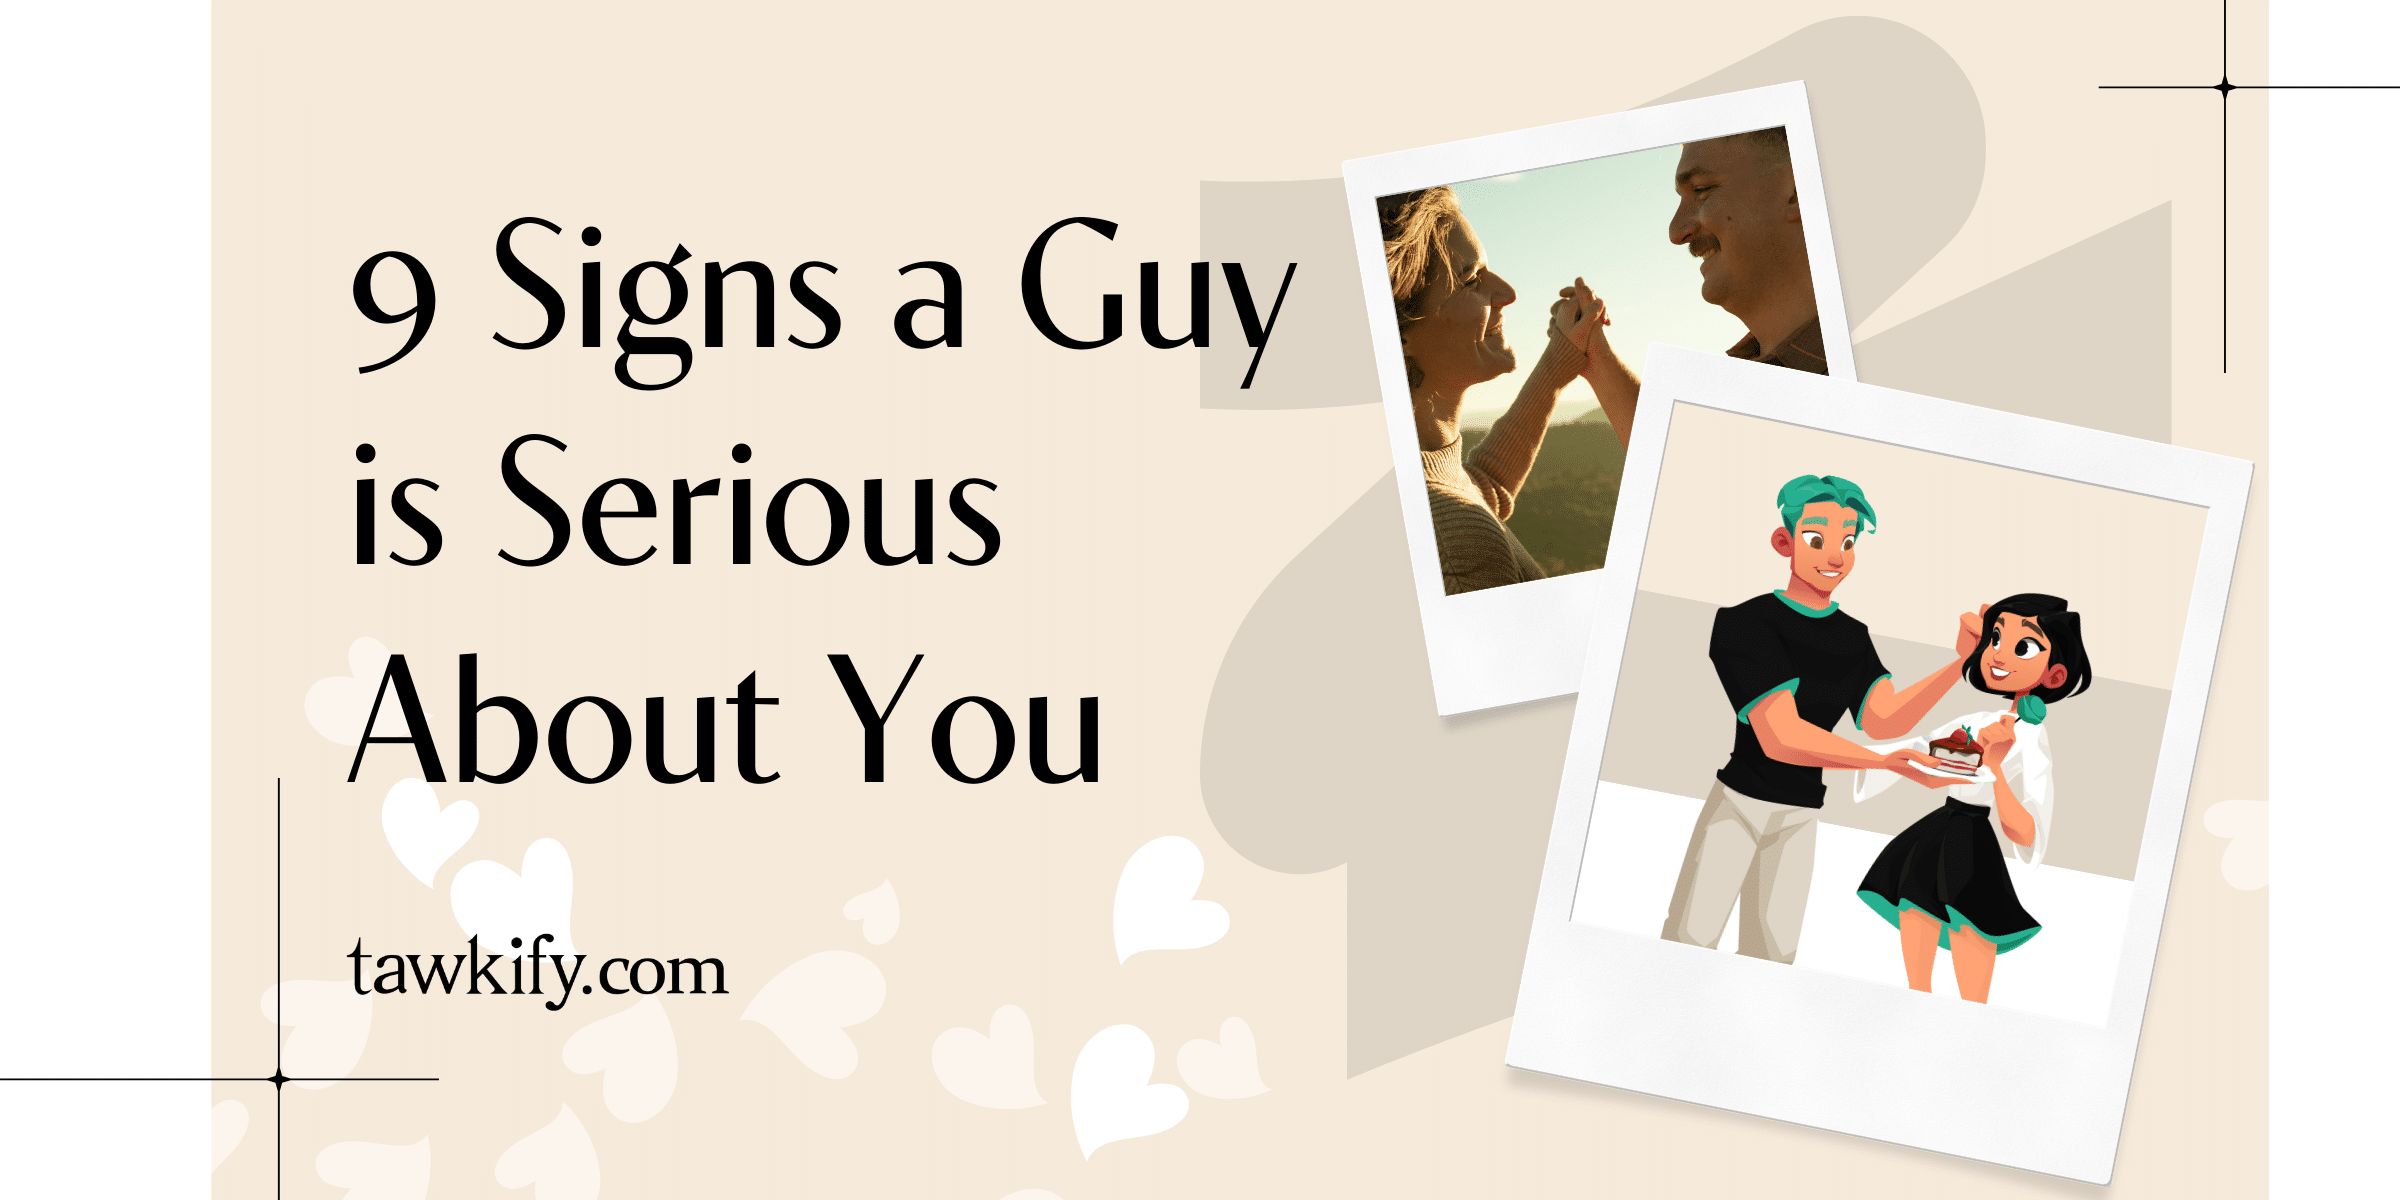 Are you wondering how to know if a guy is serious about you? Follow our guide for nine signs he sees you long-term.